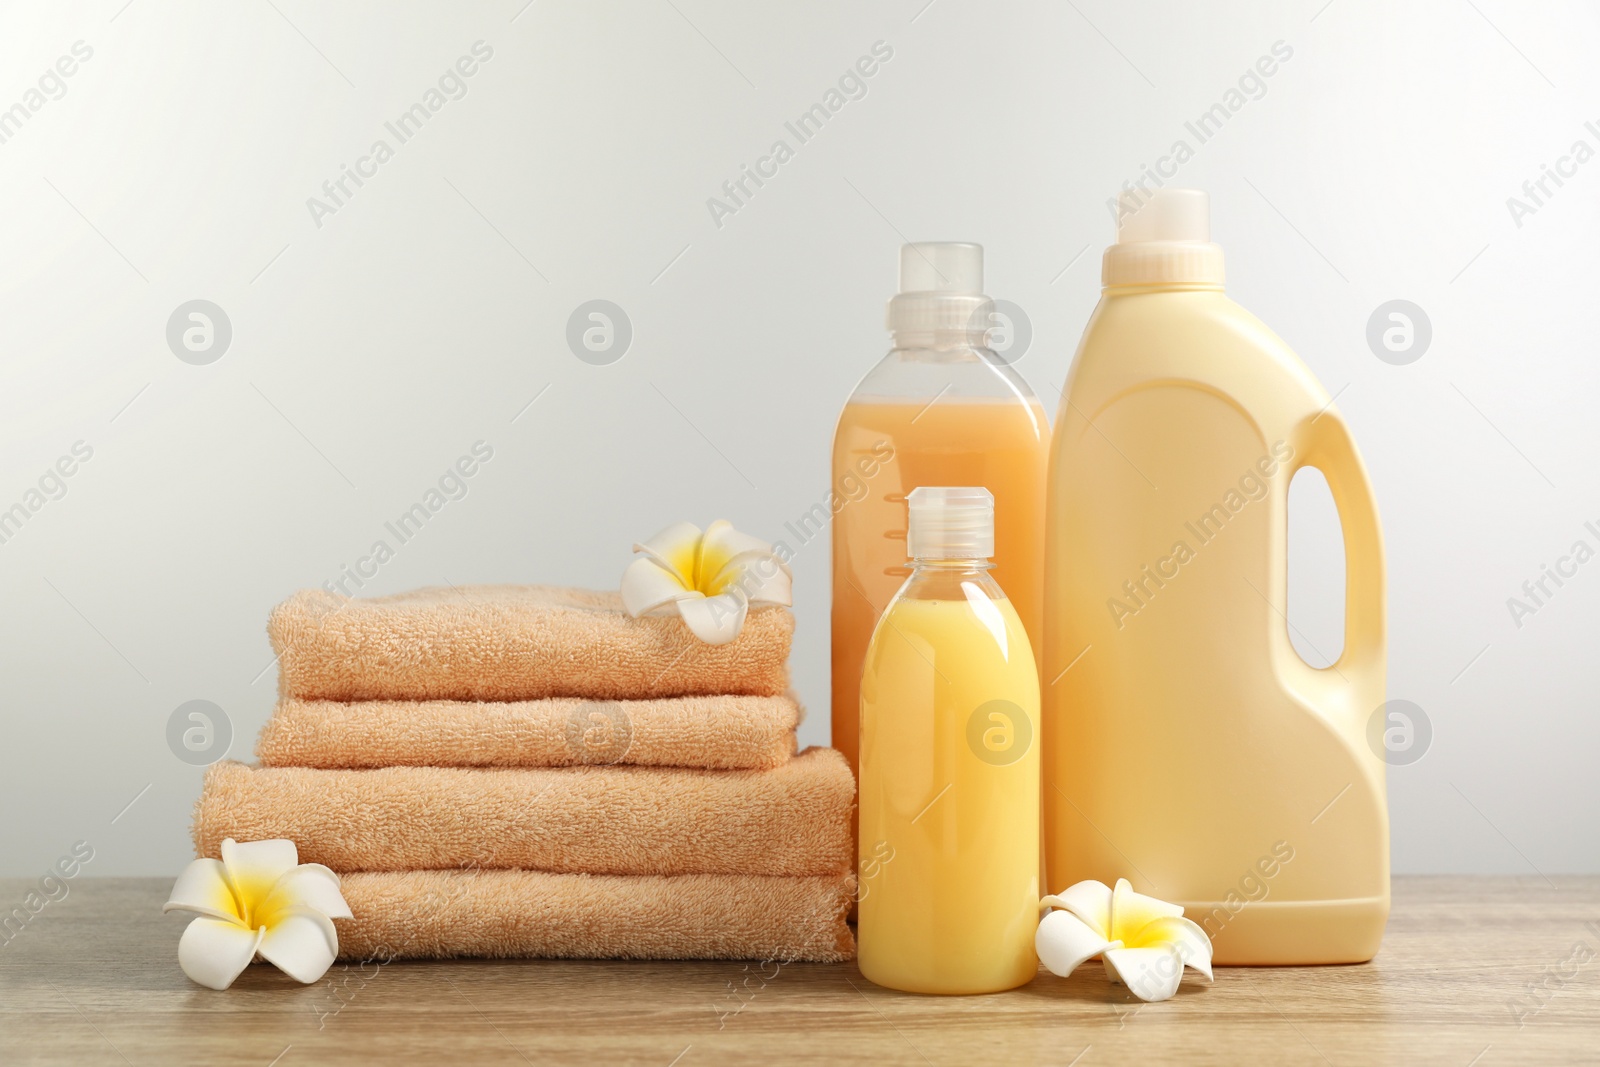 Photo of Bottles of laundry detergents, flowers and stacked fresh towels on table against white background